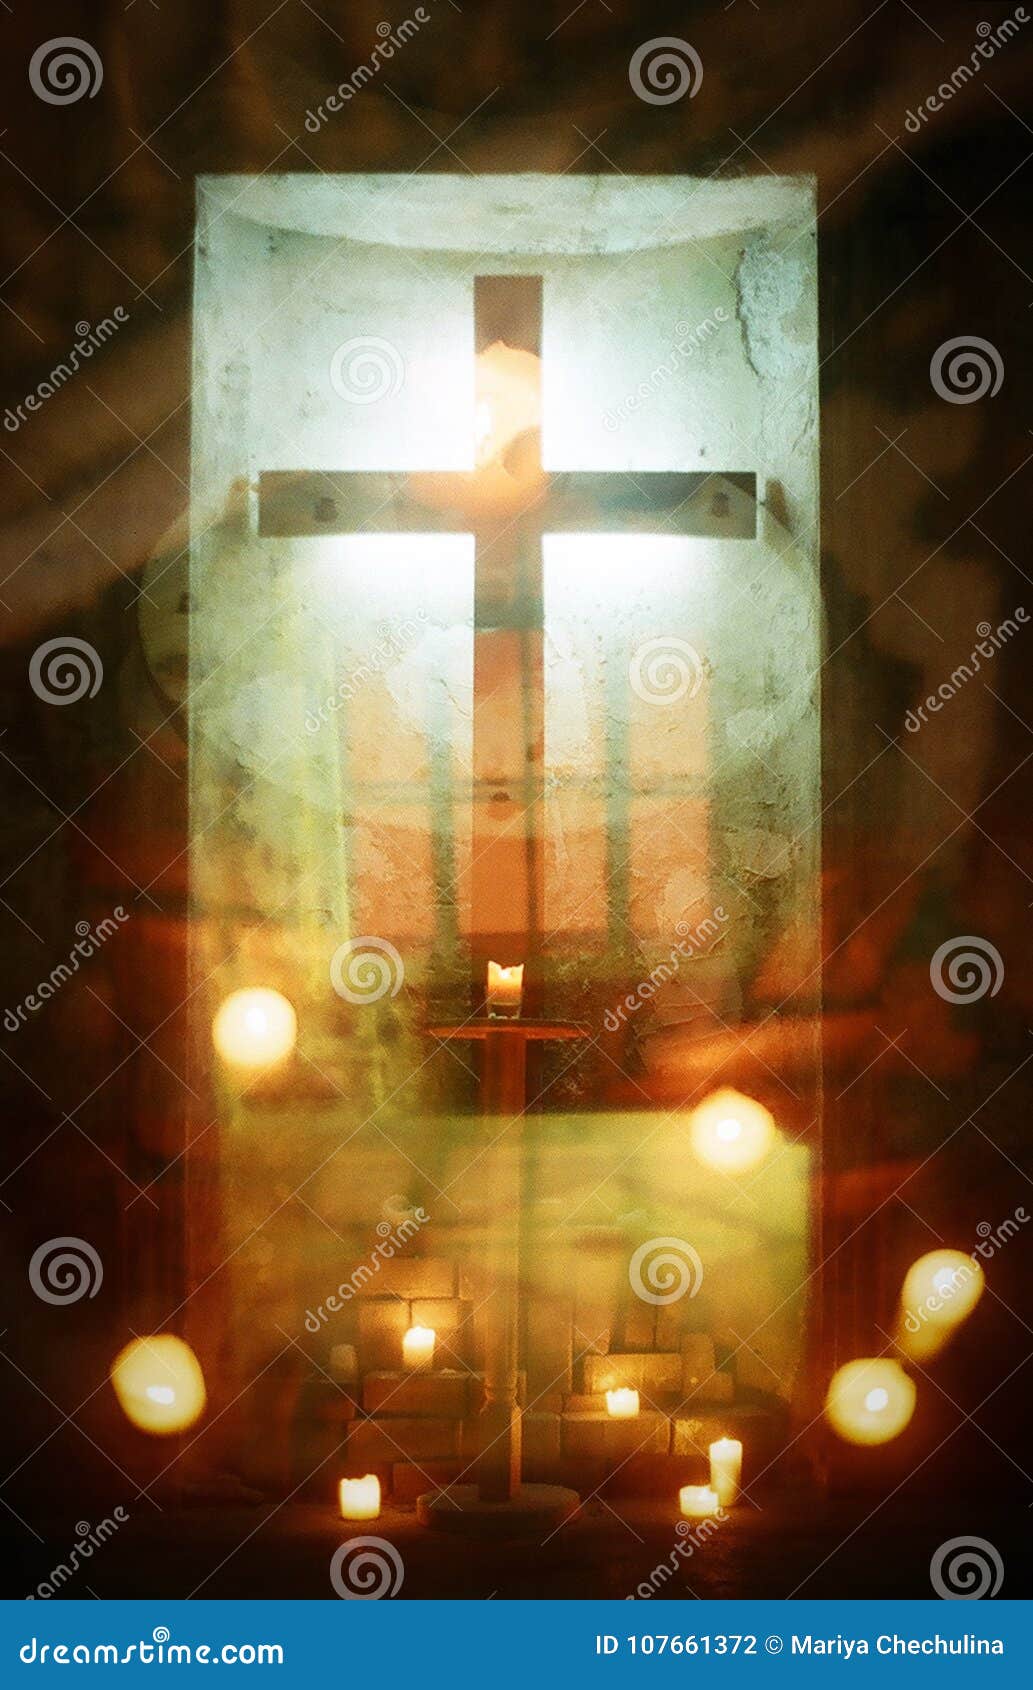 cross in catholic church and the burning candles.